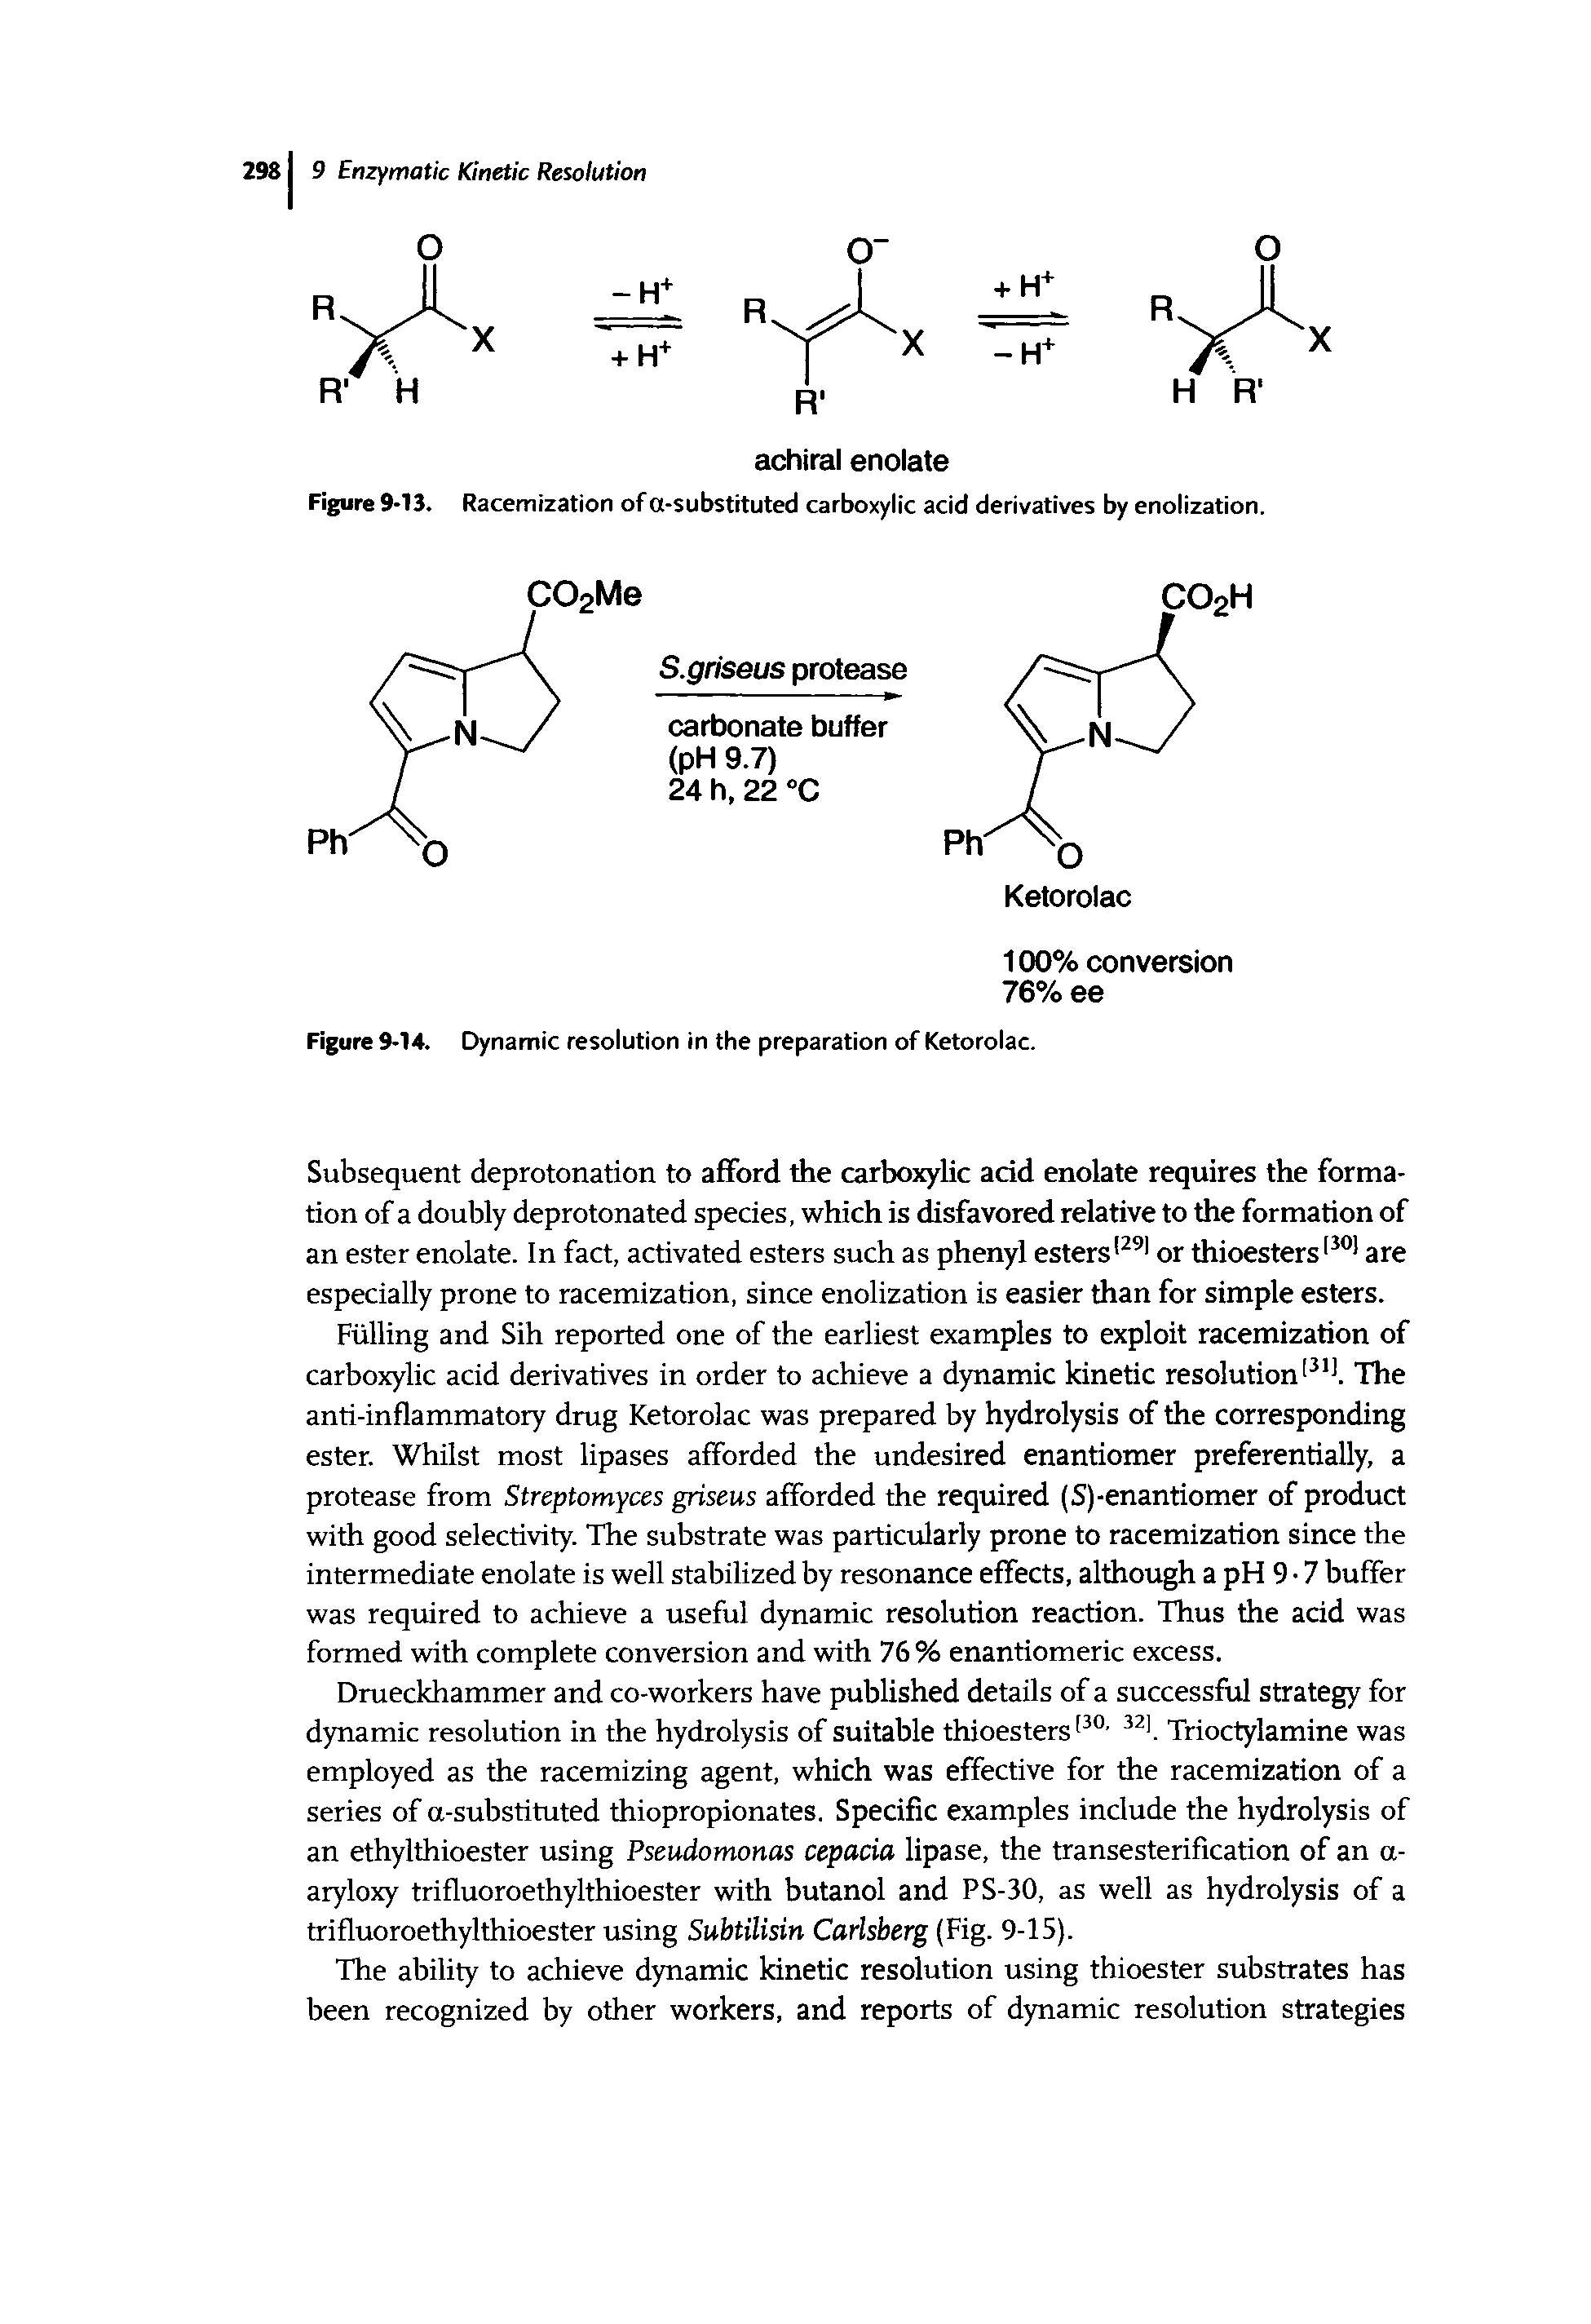 Figure 9-13. Racemization of o-substituted carboxylic acid derivatives by enolization.